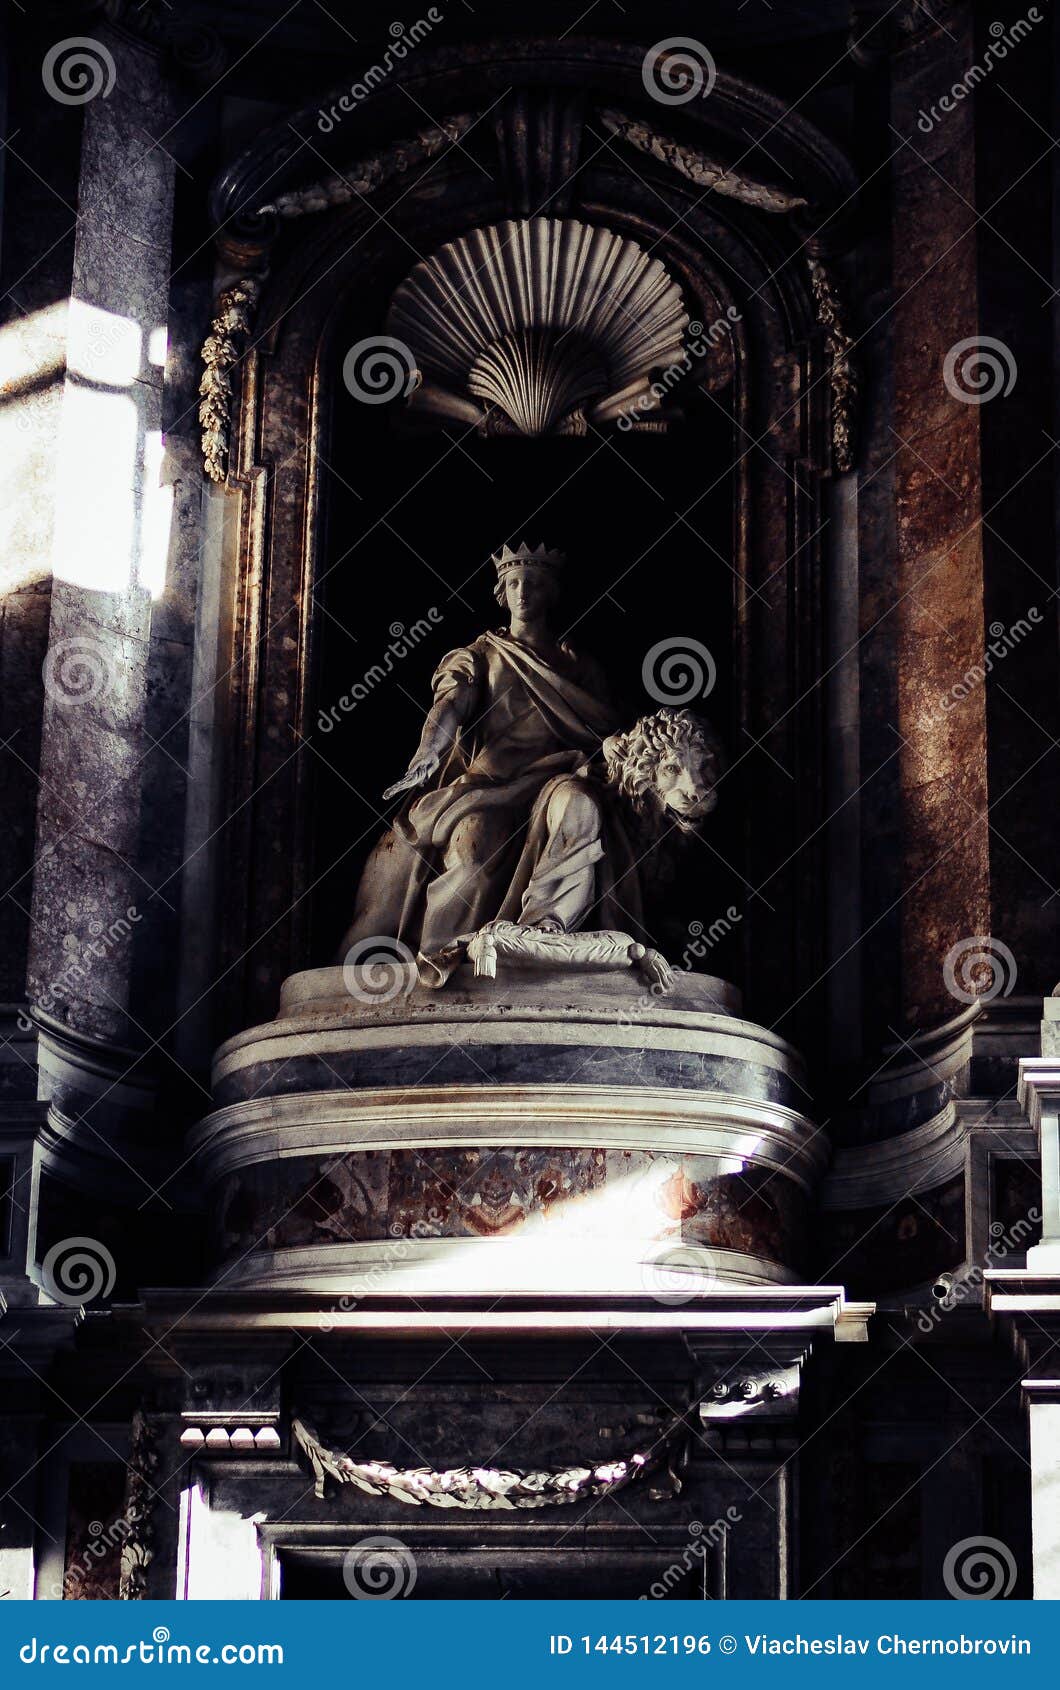 statue of karl bourbon, work of tommaso solari in the royal palace of caserta, italy